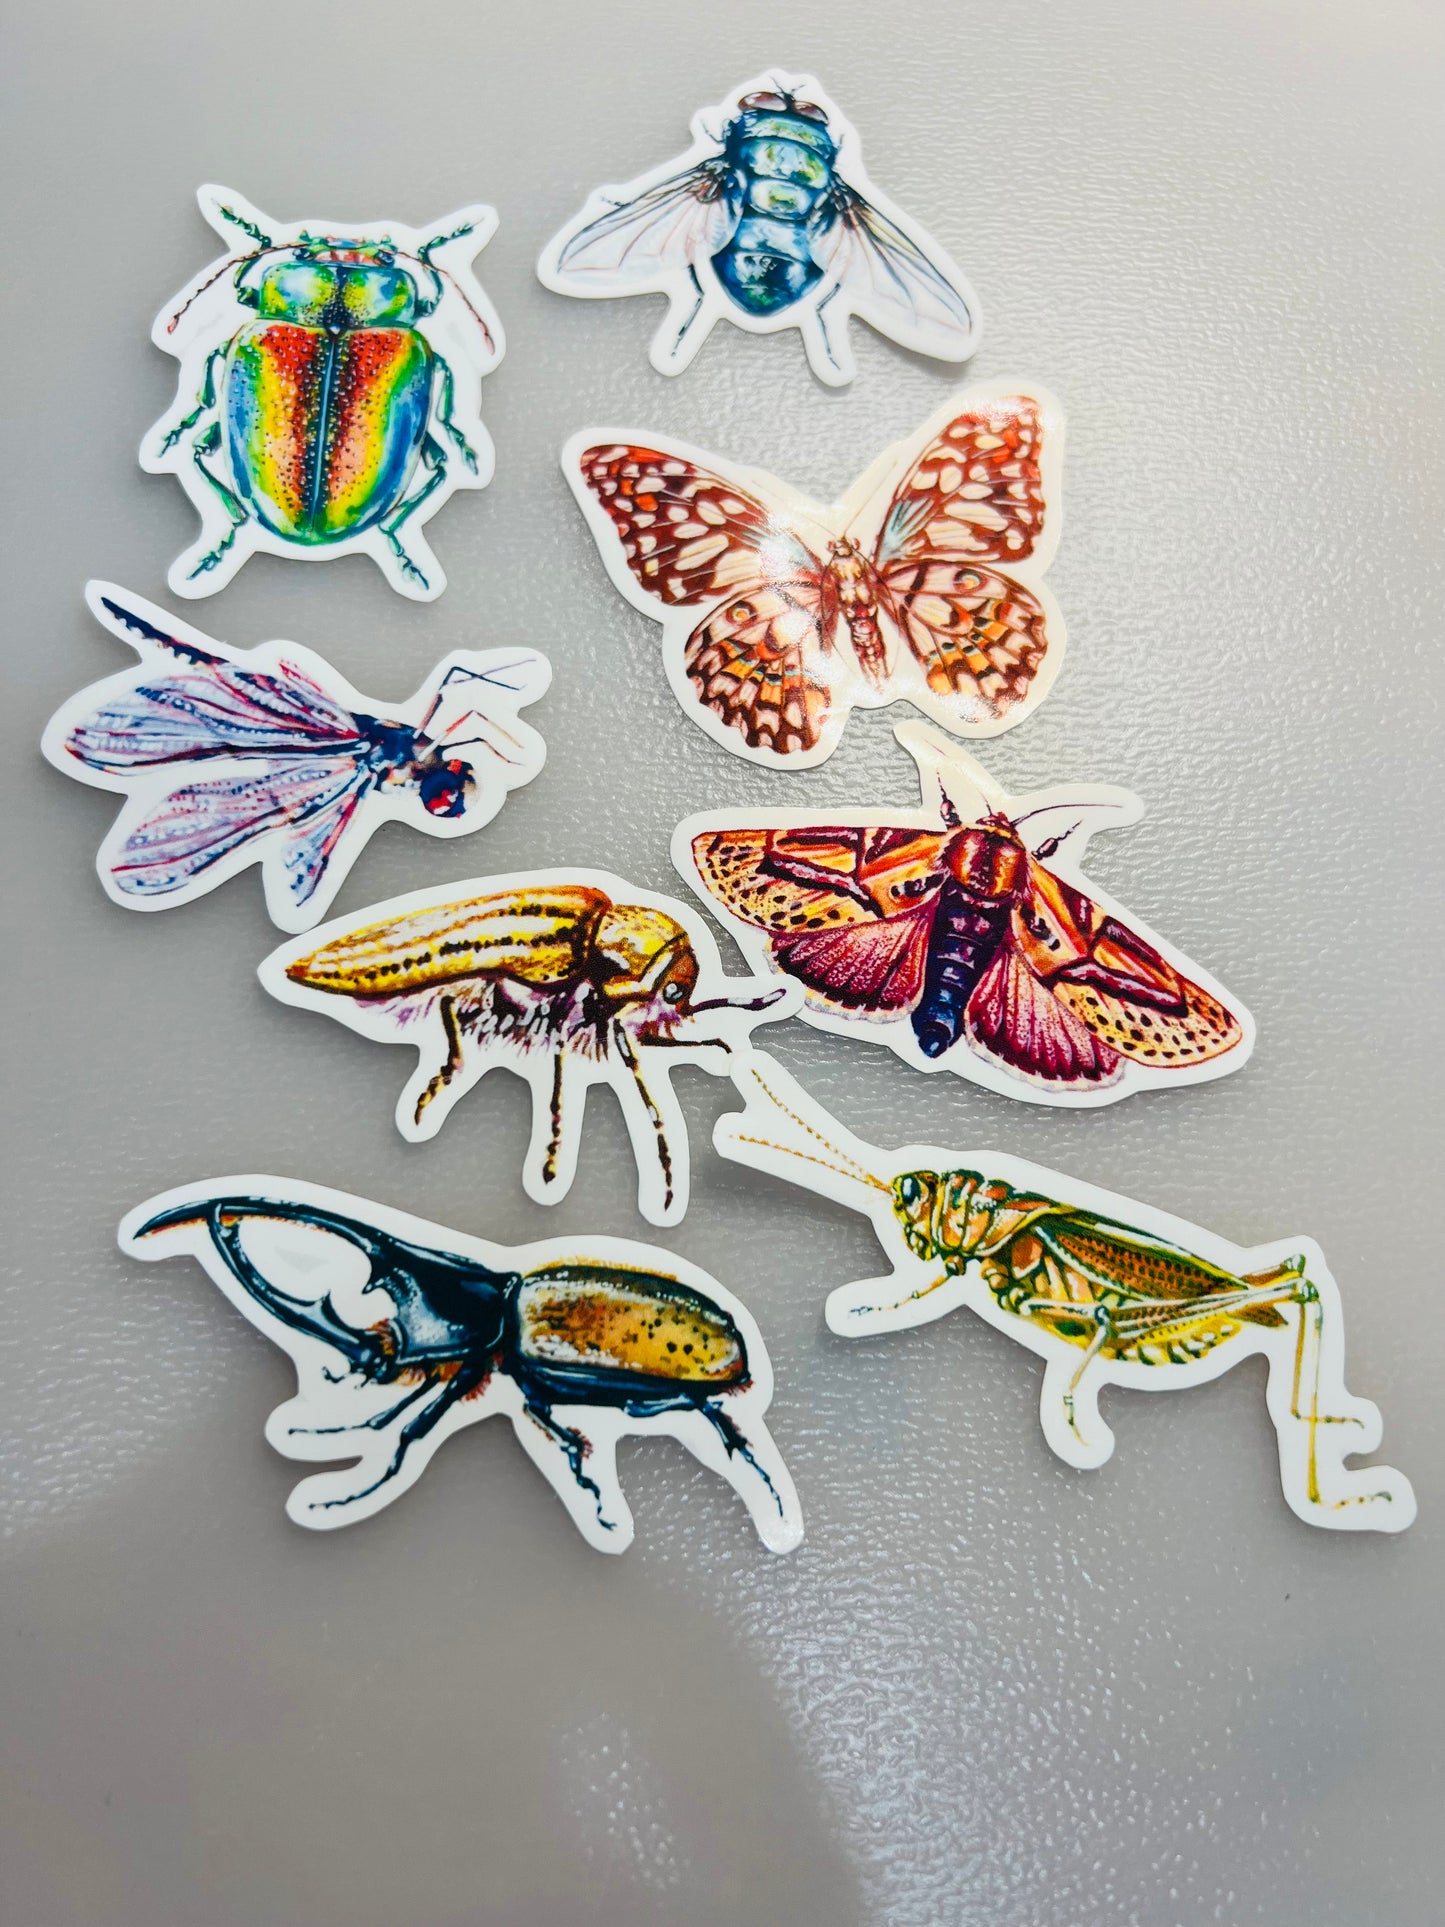 Insect stickers - 8 stickers